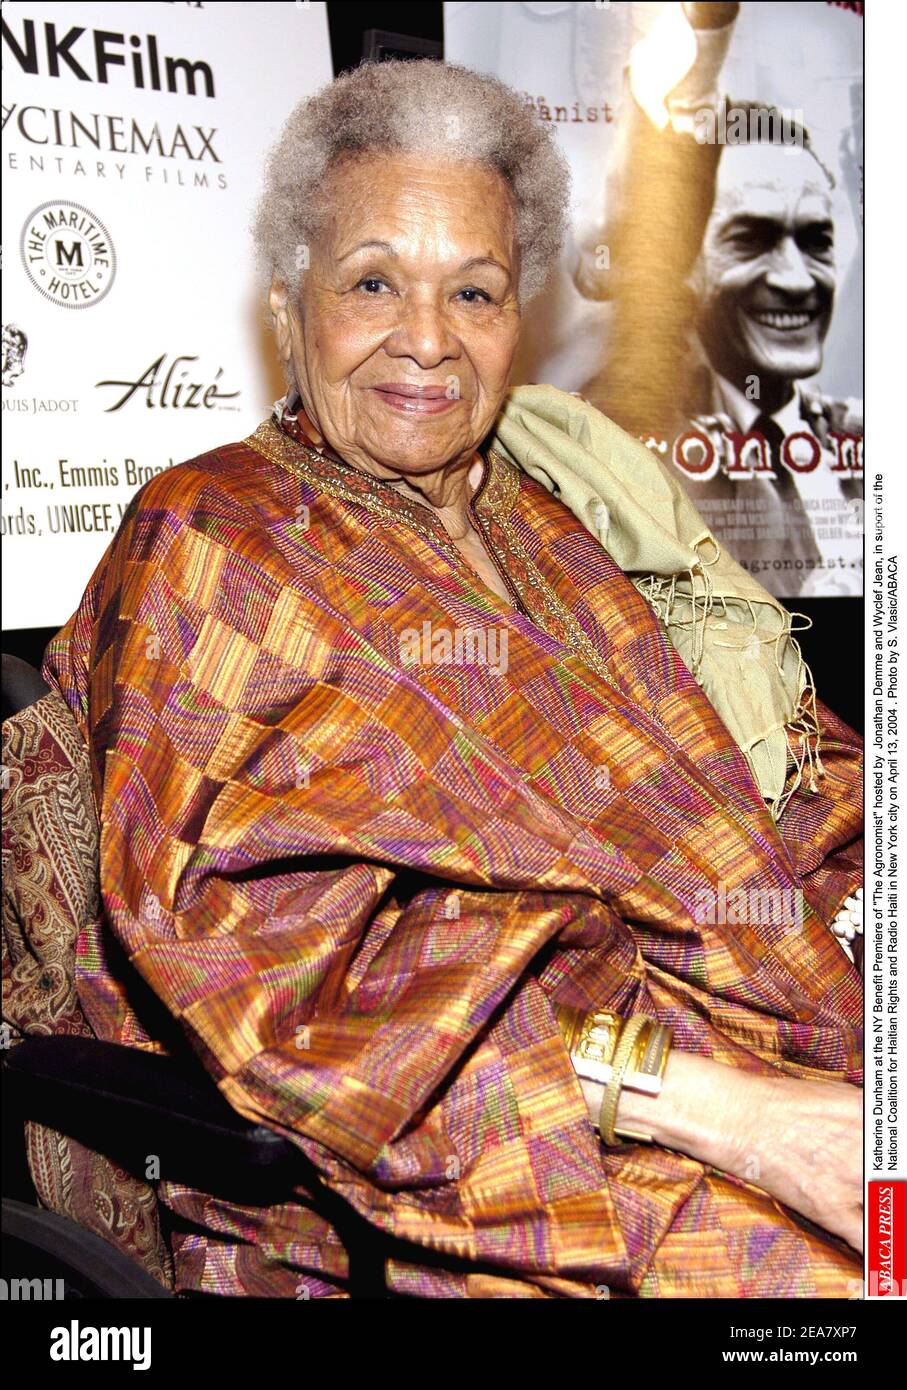 Katherine Dunham at the NY Benefit Premiere of The Agronomist hosted by Jonathan Demme and Wyclef Jean, in suport of the National Coalition for Haitian Rights and Radio Haiti in New York city on April 13, 2004 . Photo by S. Vlasic/ABACA Stock Photo